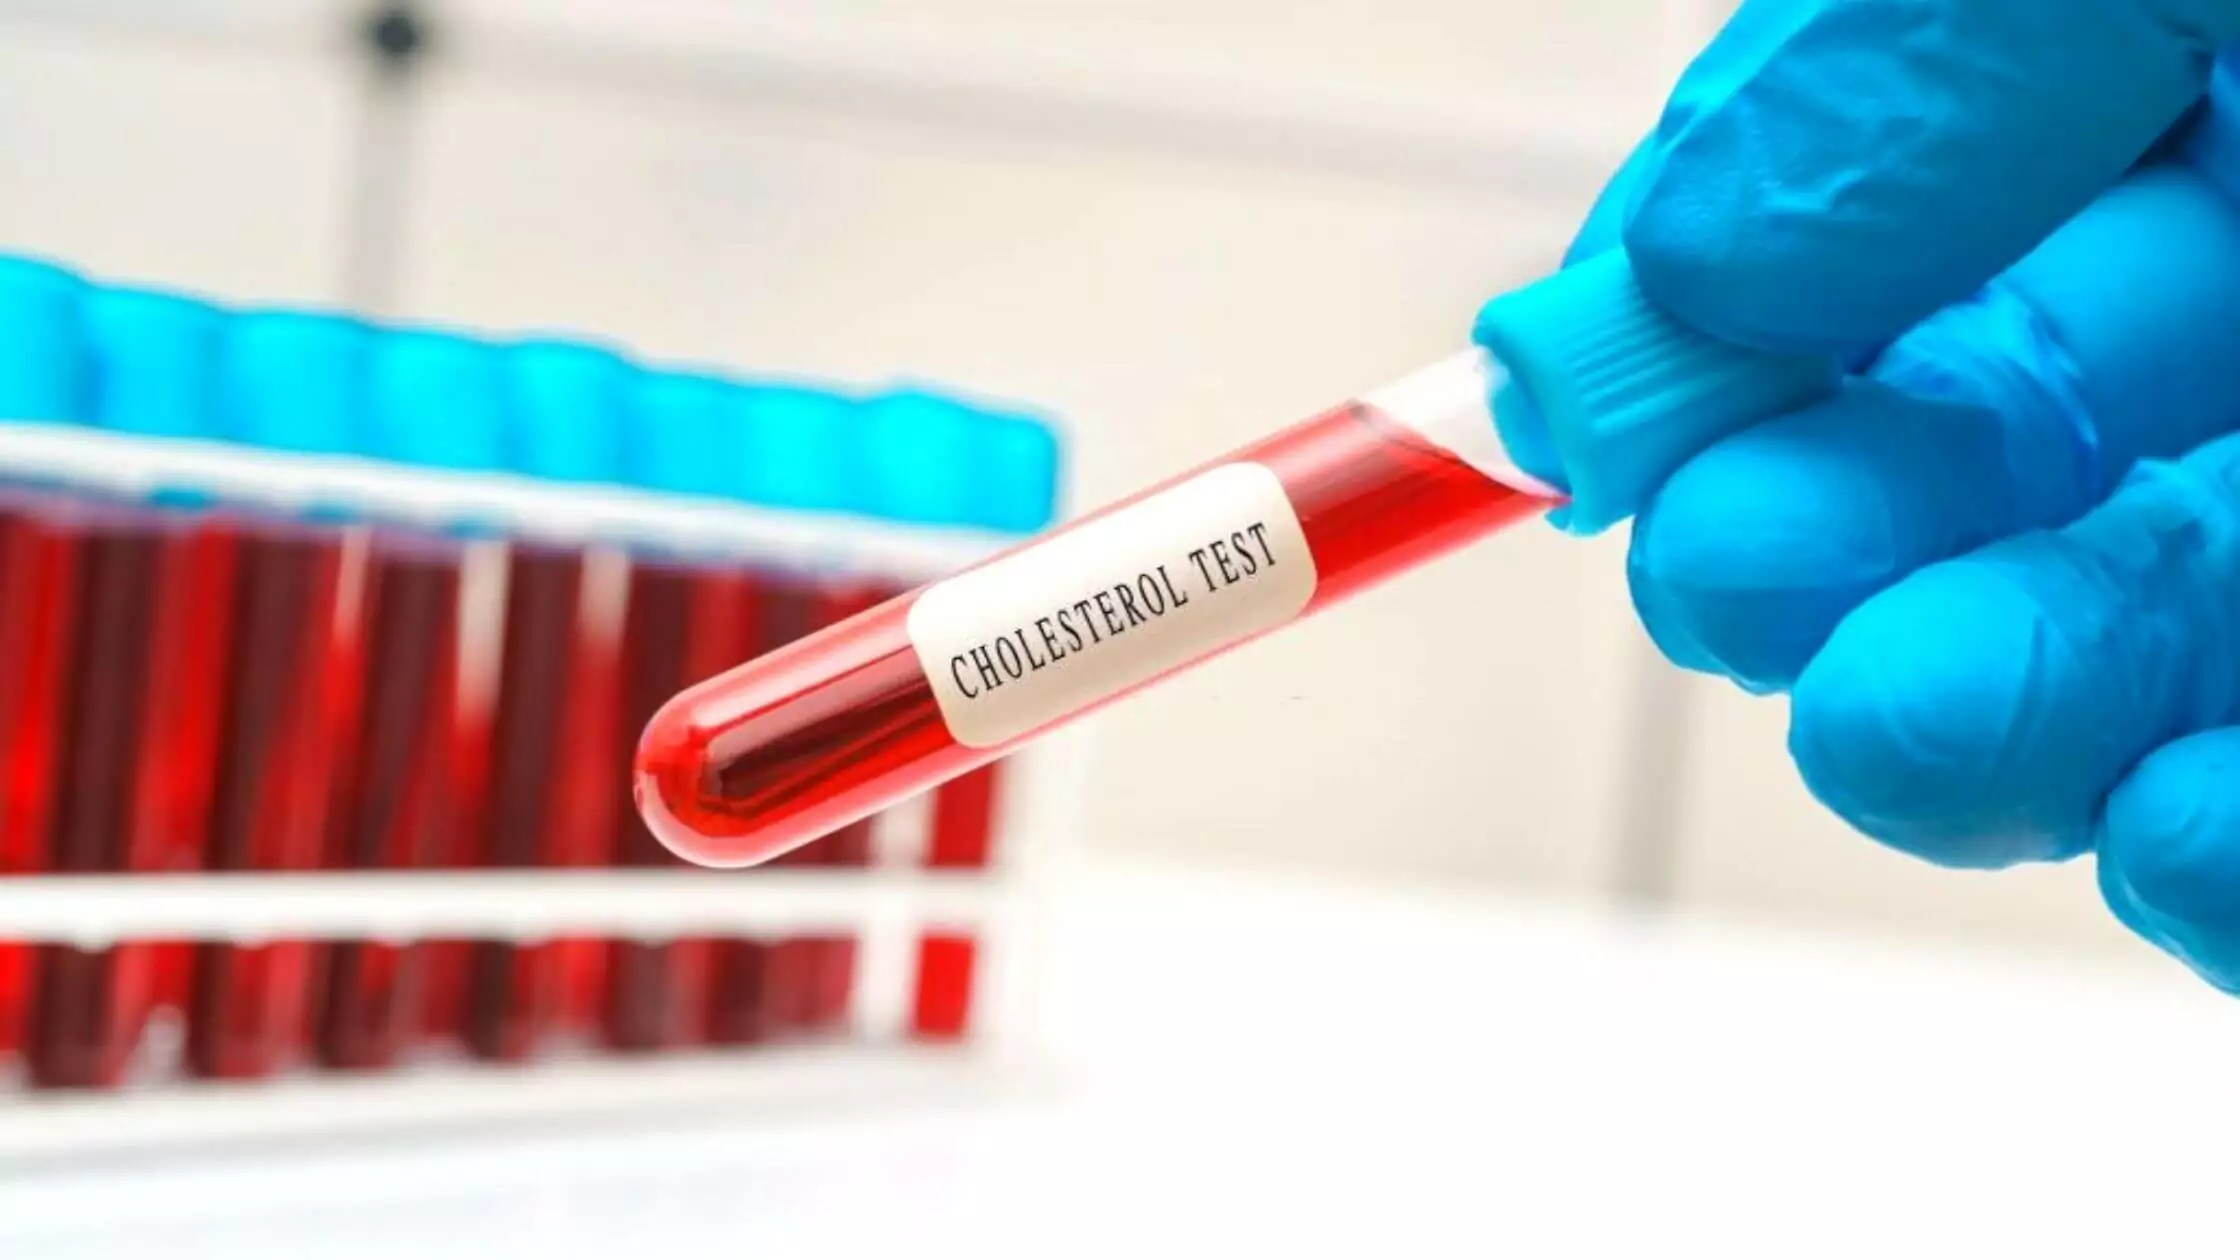 What Should I Avoid Before A Cholesterol Test